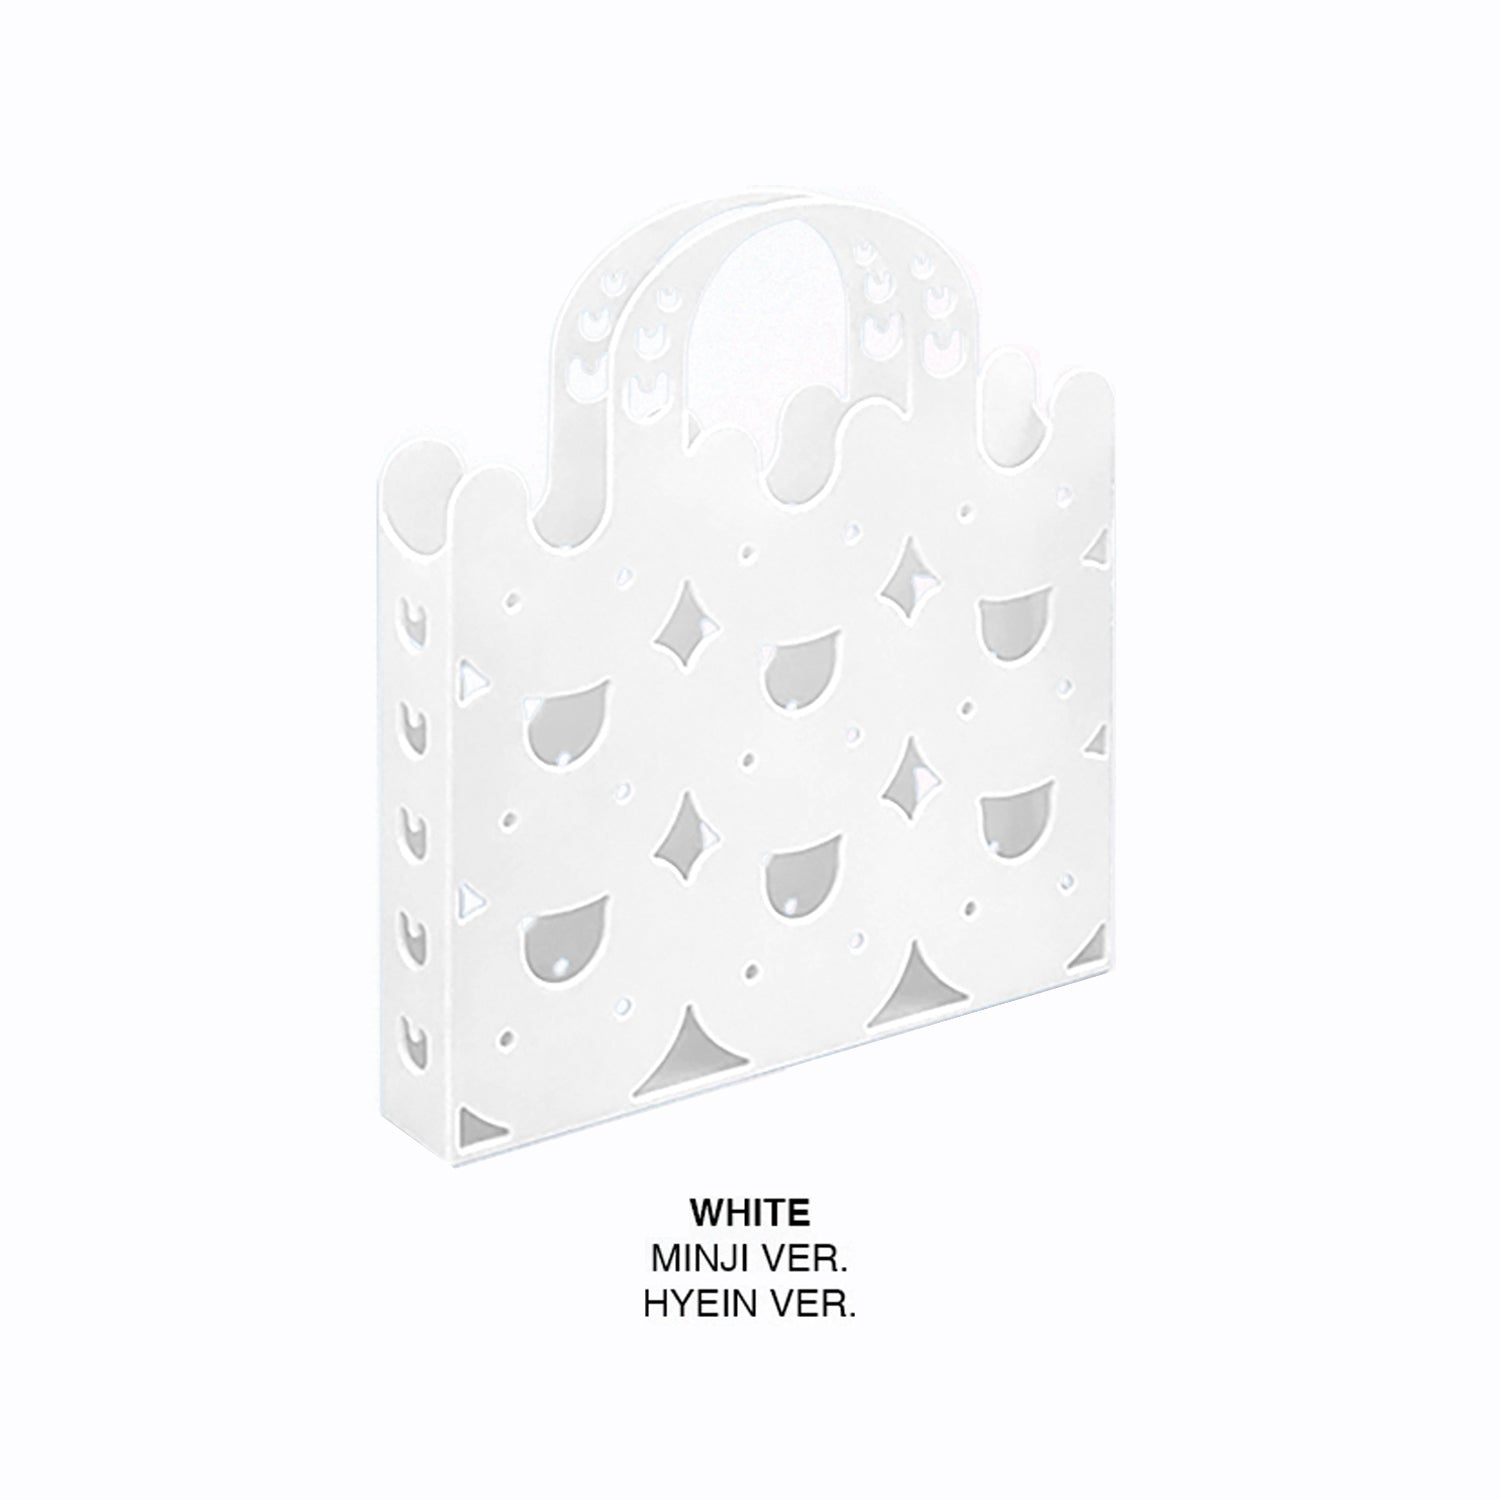 NEWJEANS 2ND EP ALBUM 'GET UP' (BUNNY BEACH BAG) WHITE VERSION COVER